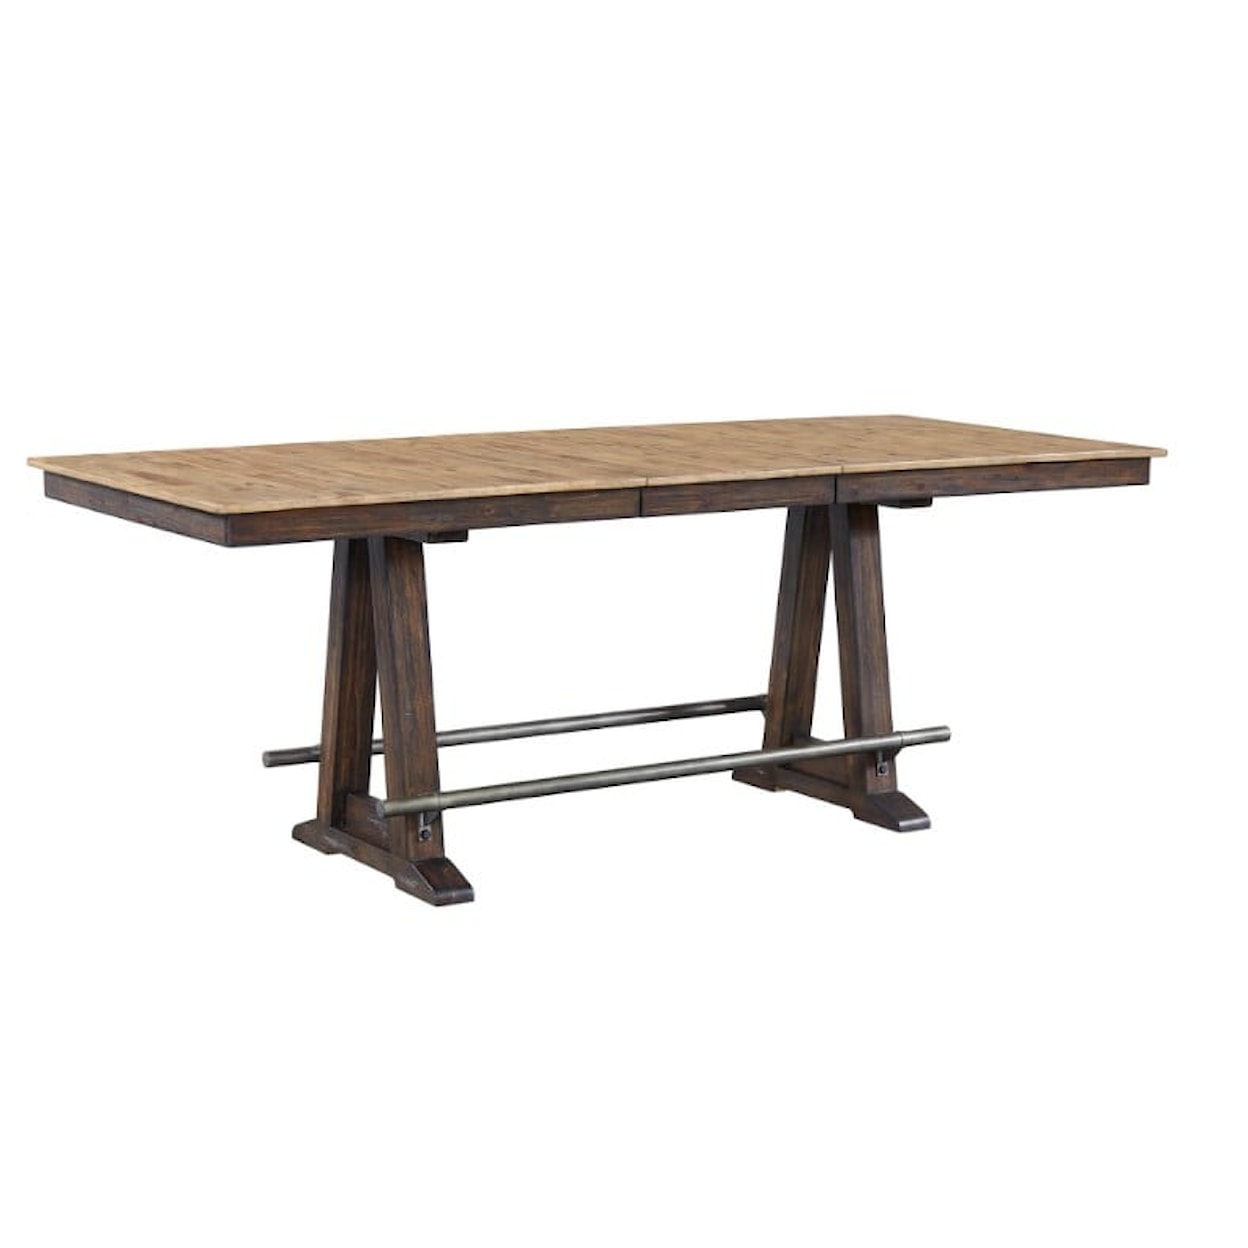 VFM Signature Transitions Dining Trestle Counter-Height Table